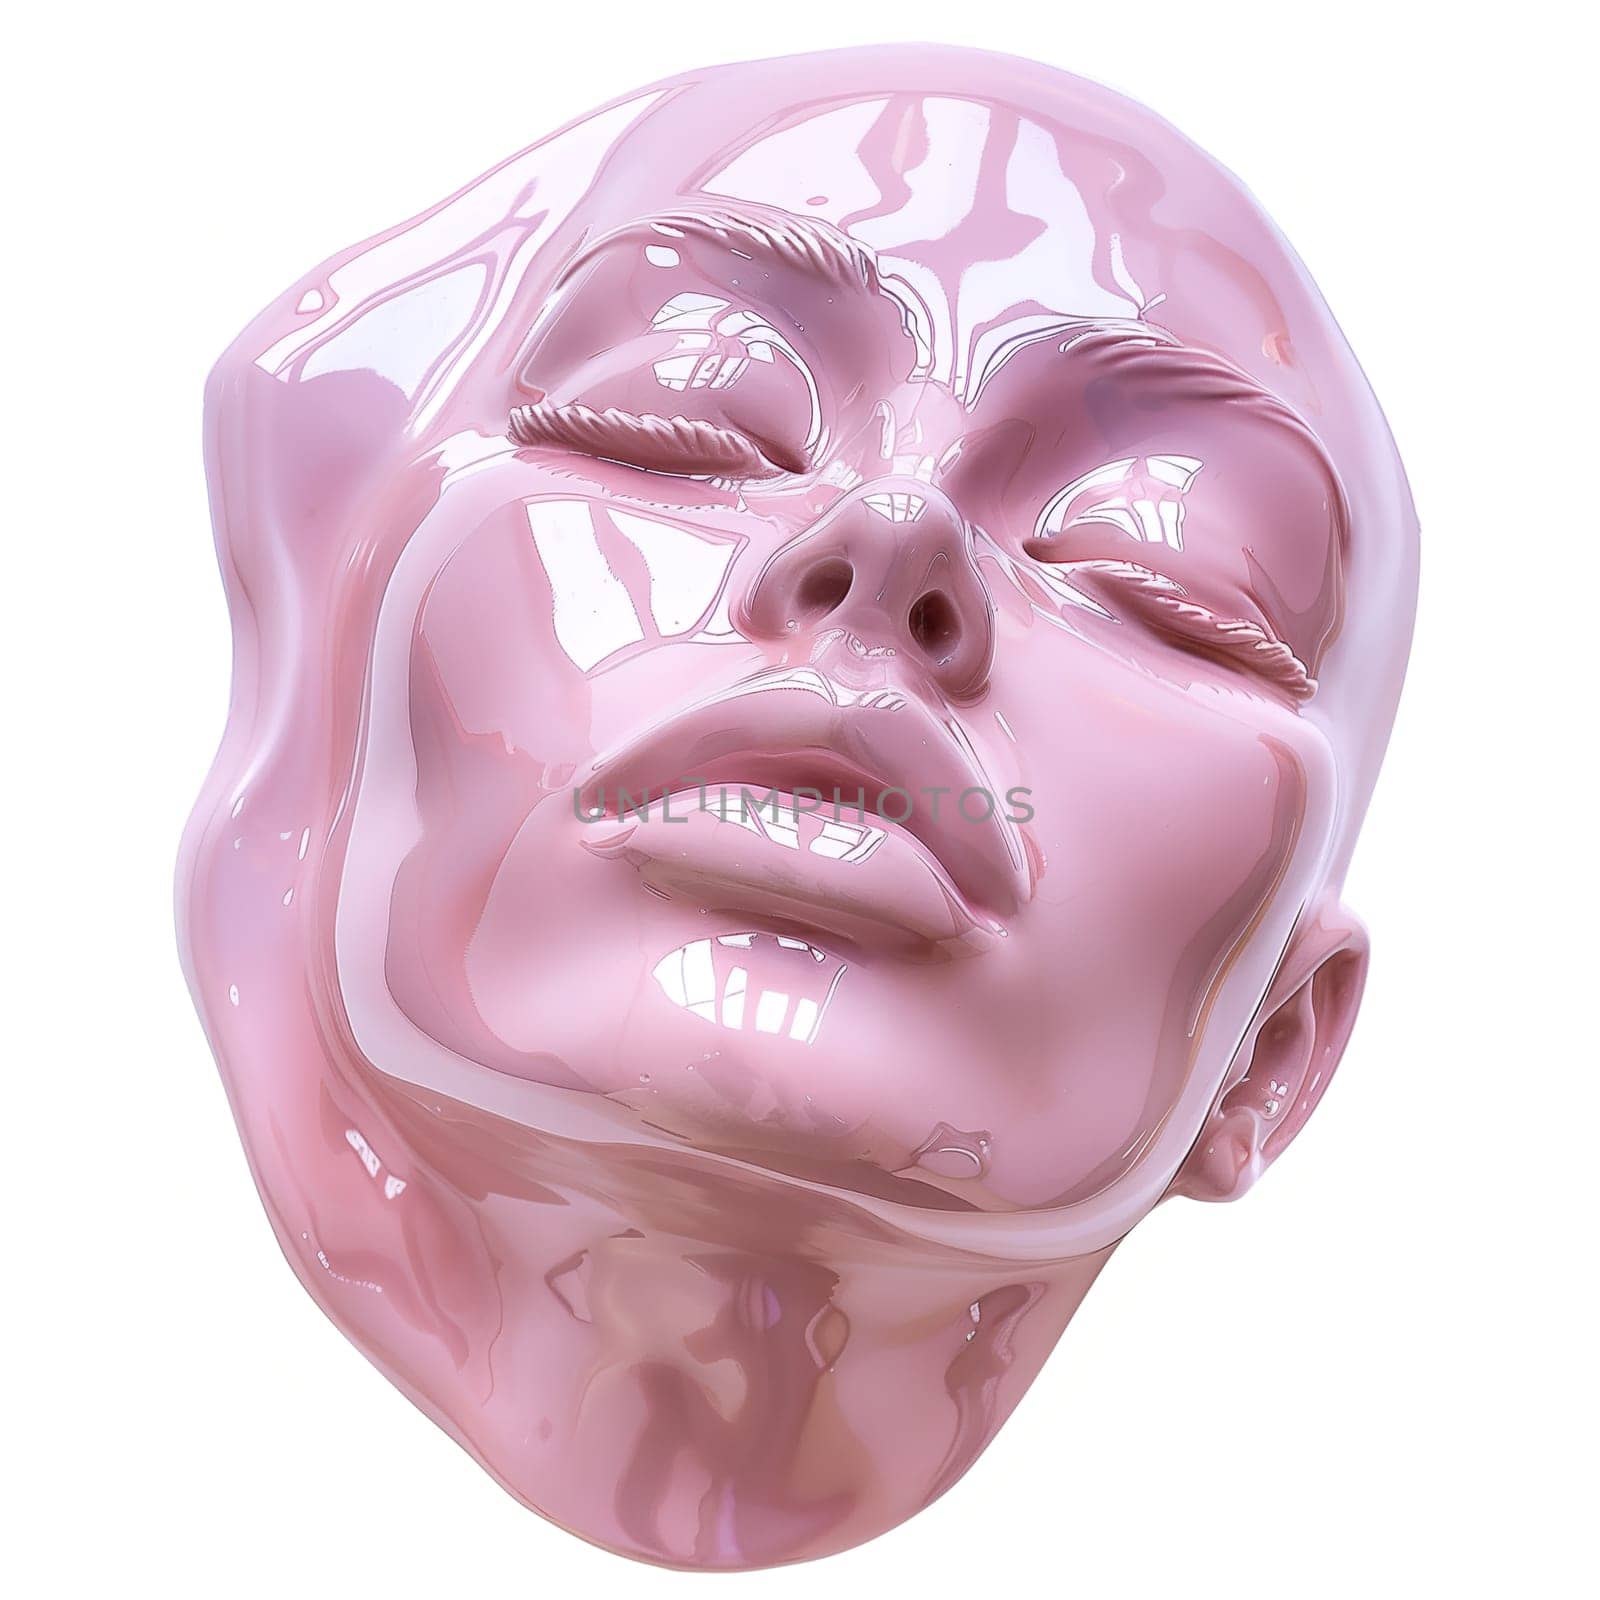 Glossy pink beauty woman face sculpture cut out by Dustick